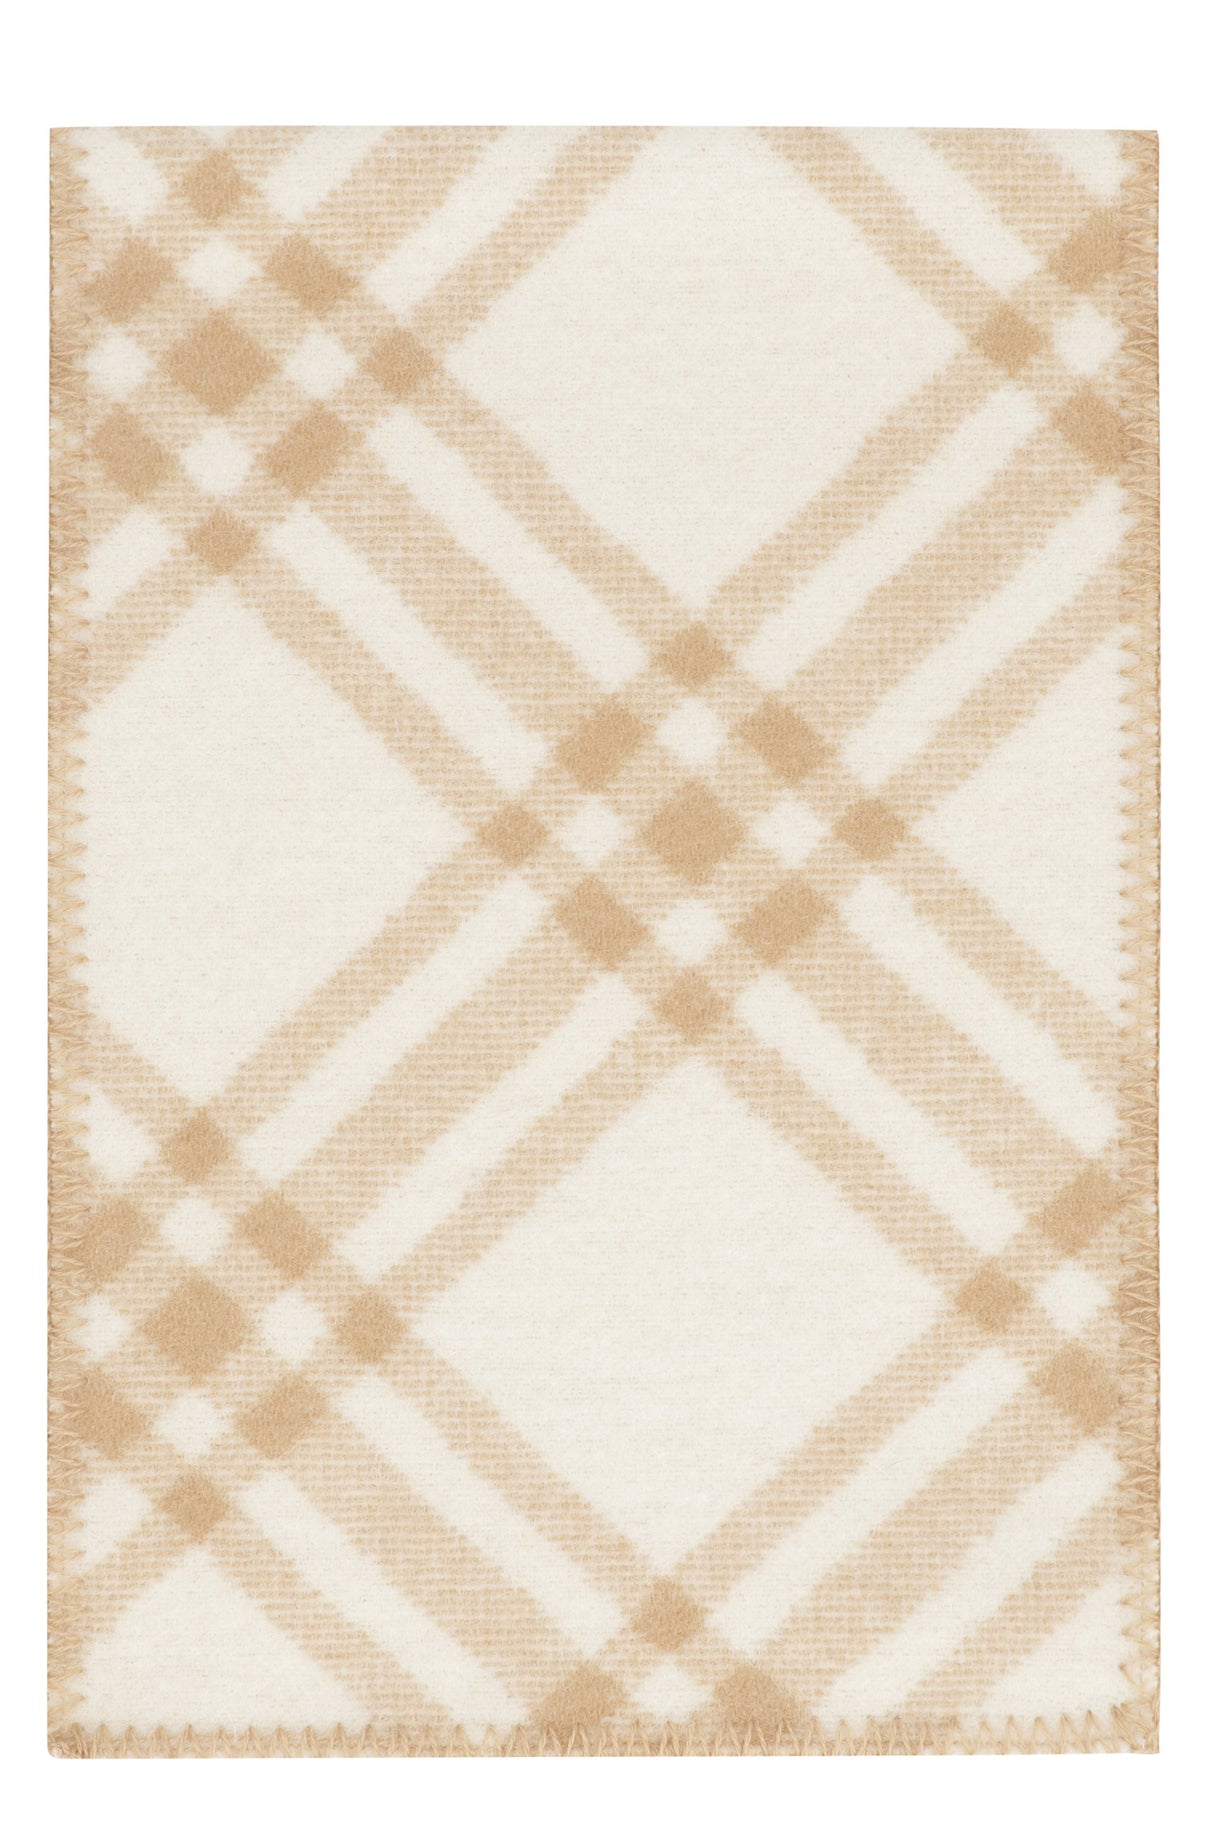 BURBERRY Luxury Wool Check Scarf for Men in Beige - FW23 Collection